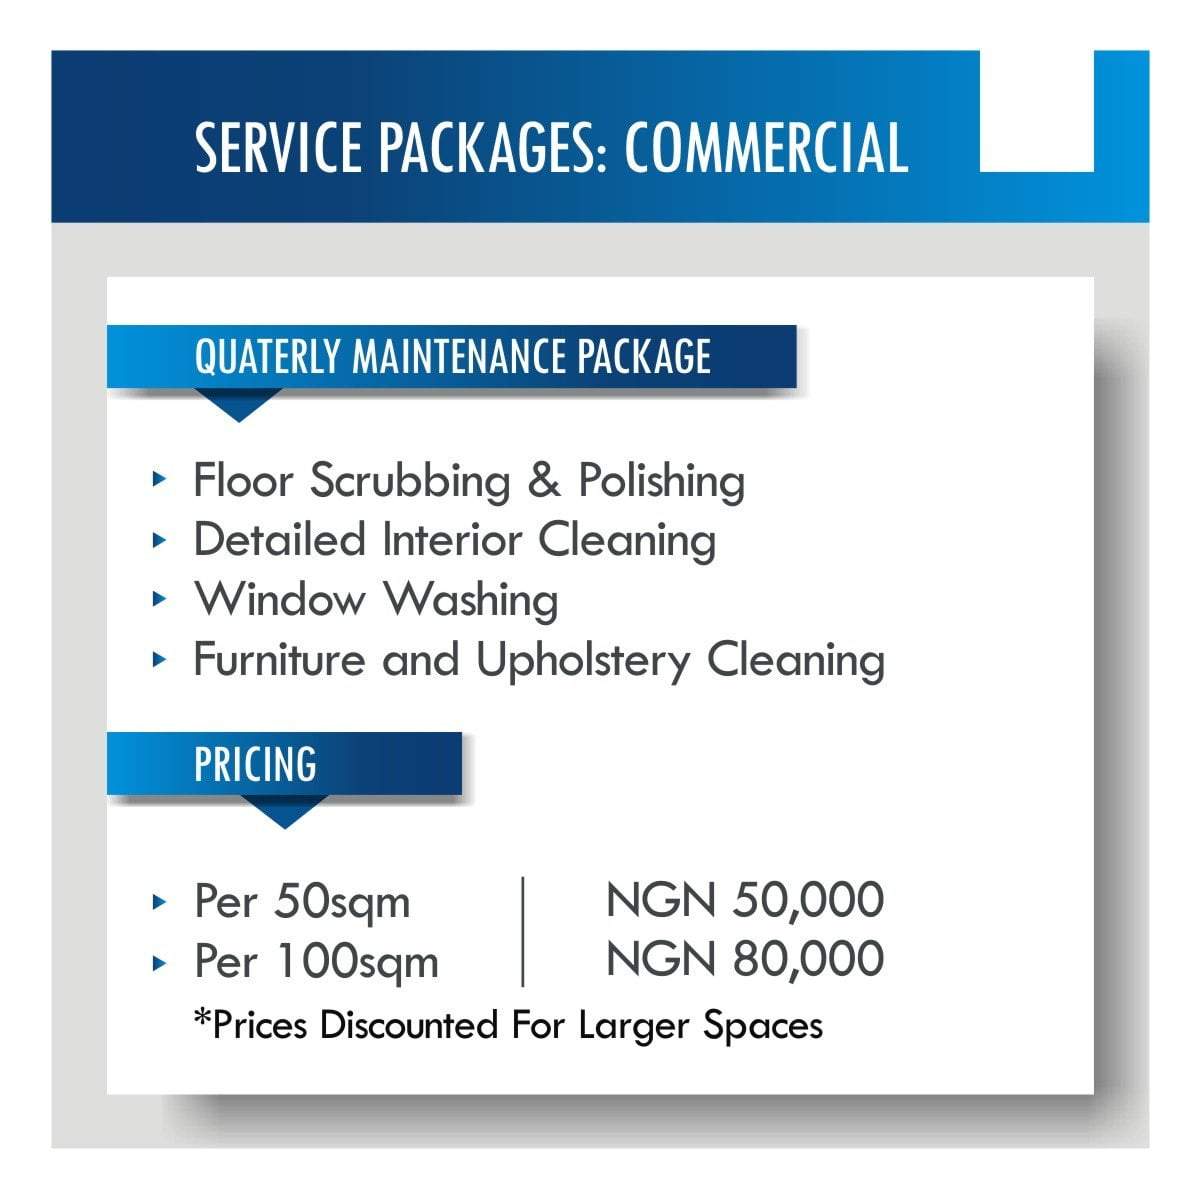 Quarterly Shop/Office Cleaning & Maintenance Service